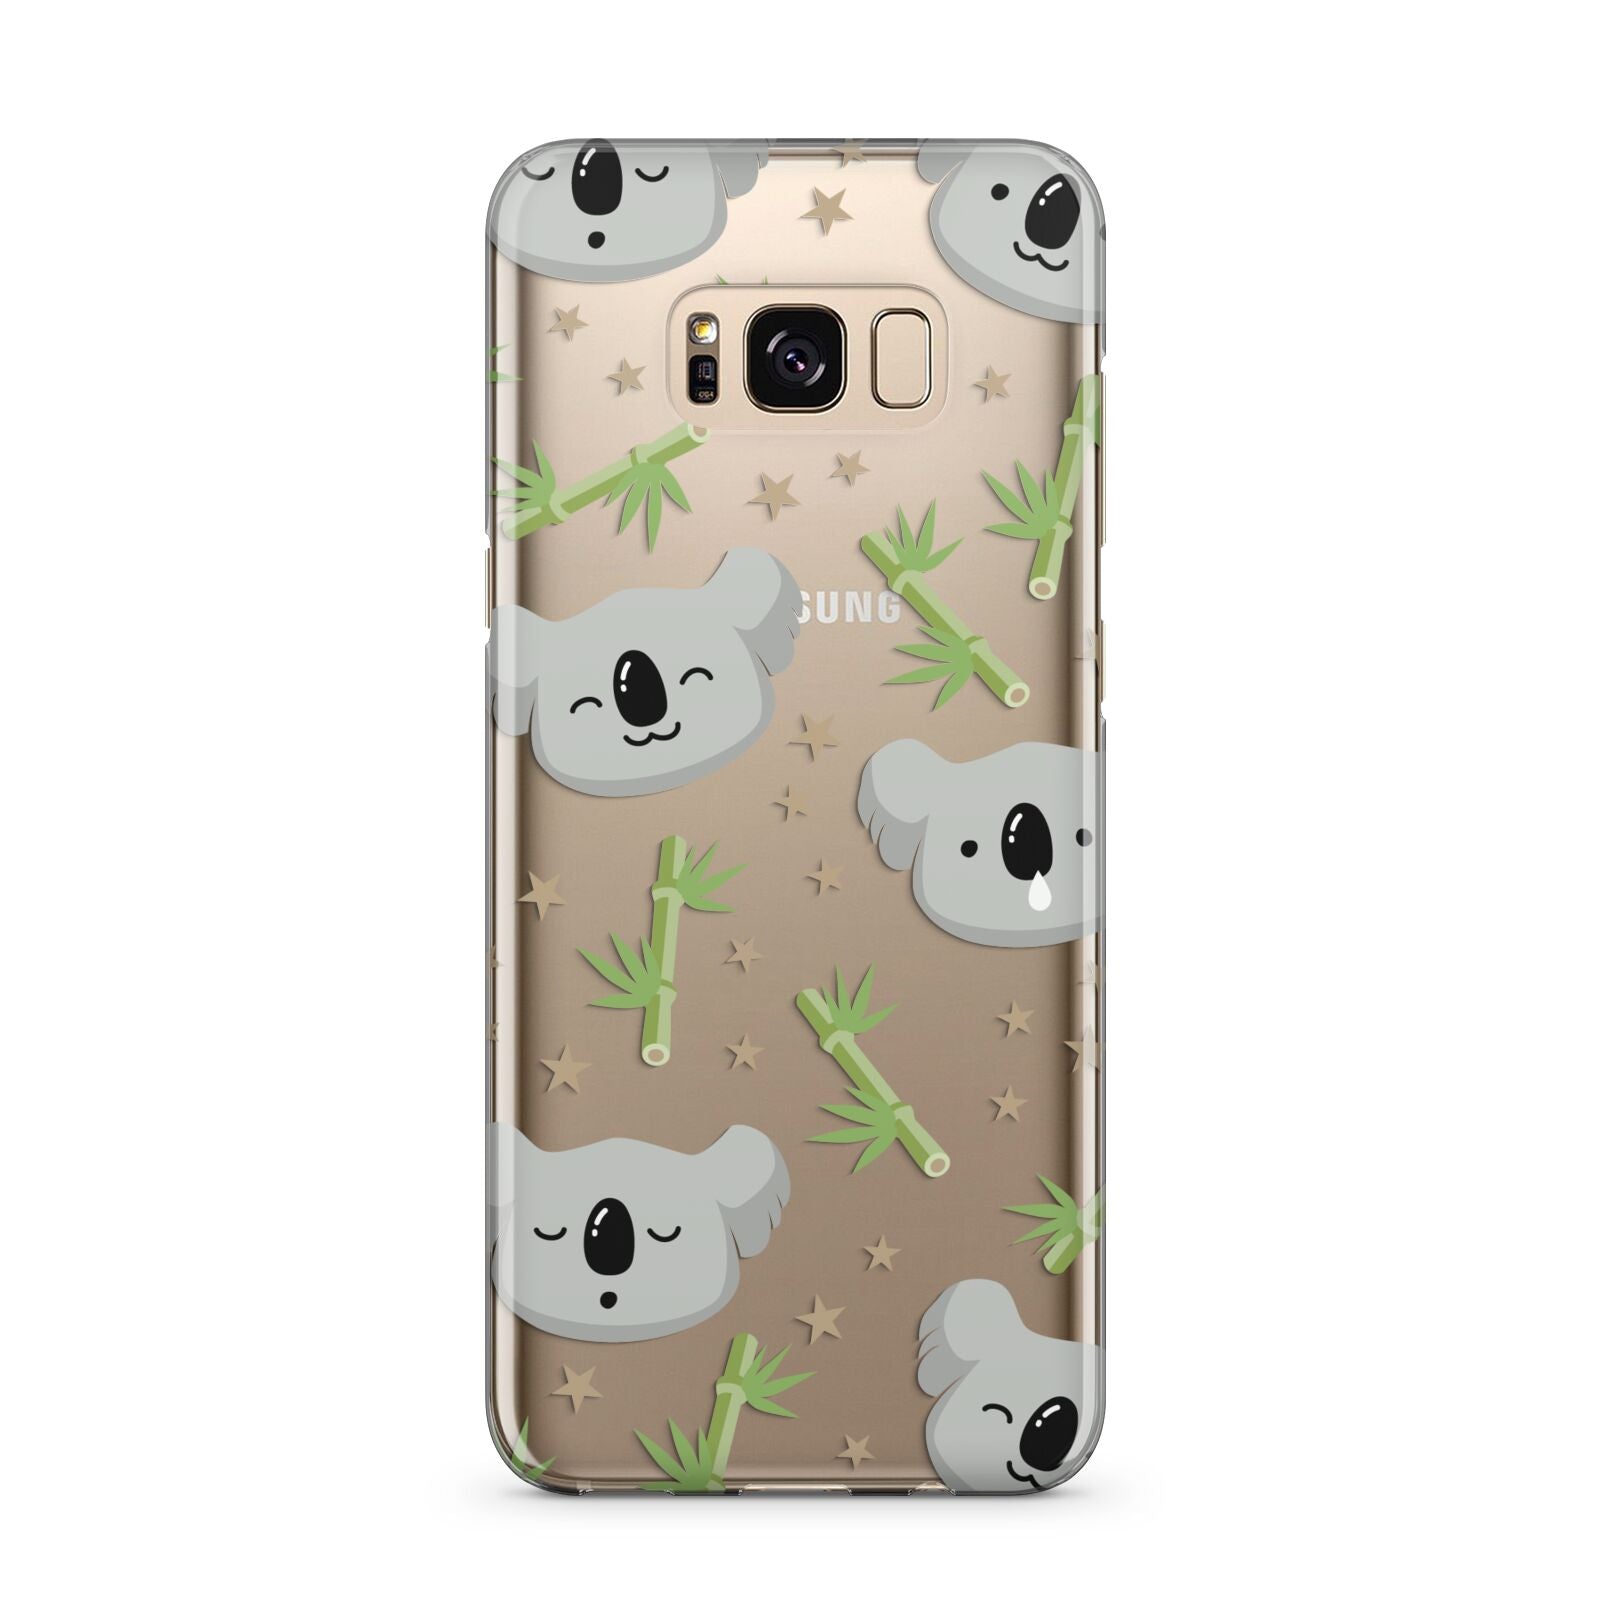 Koala Faces with Transparent Background Samsung Galaxy S8 Plus Case